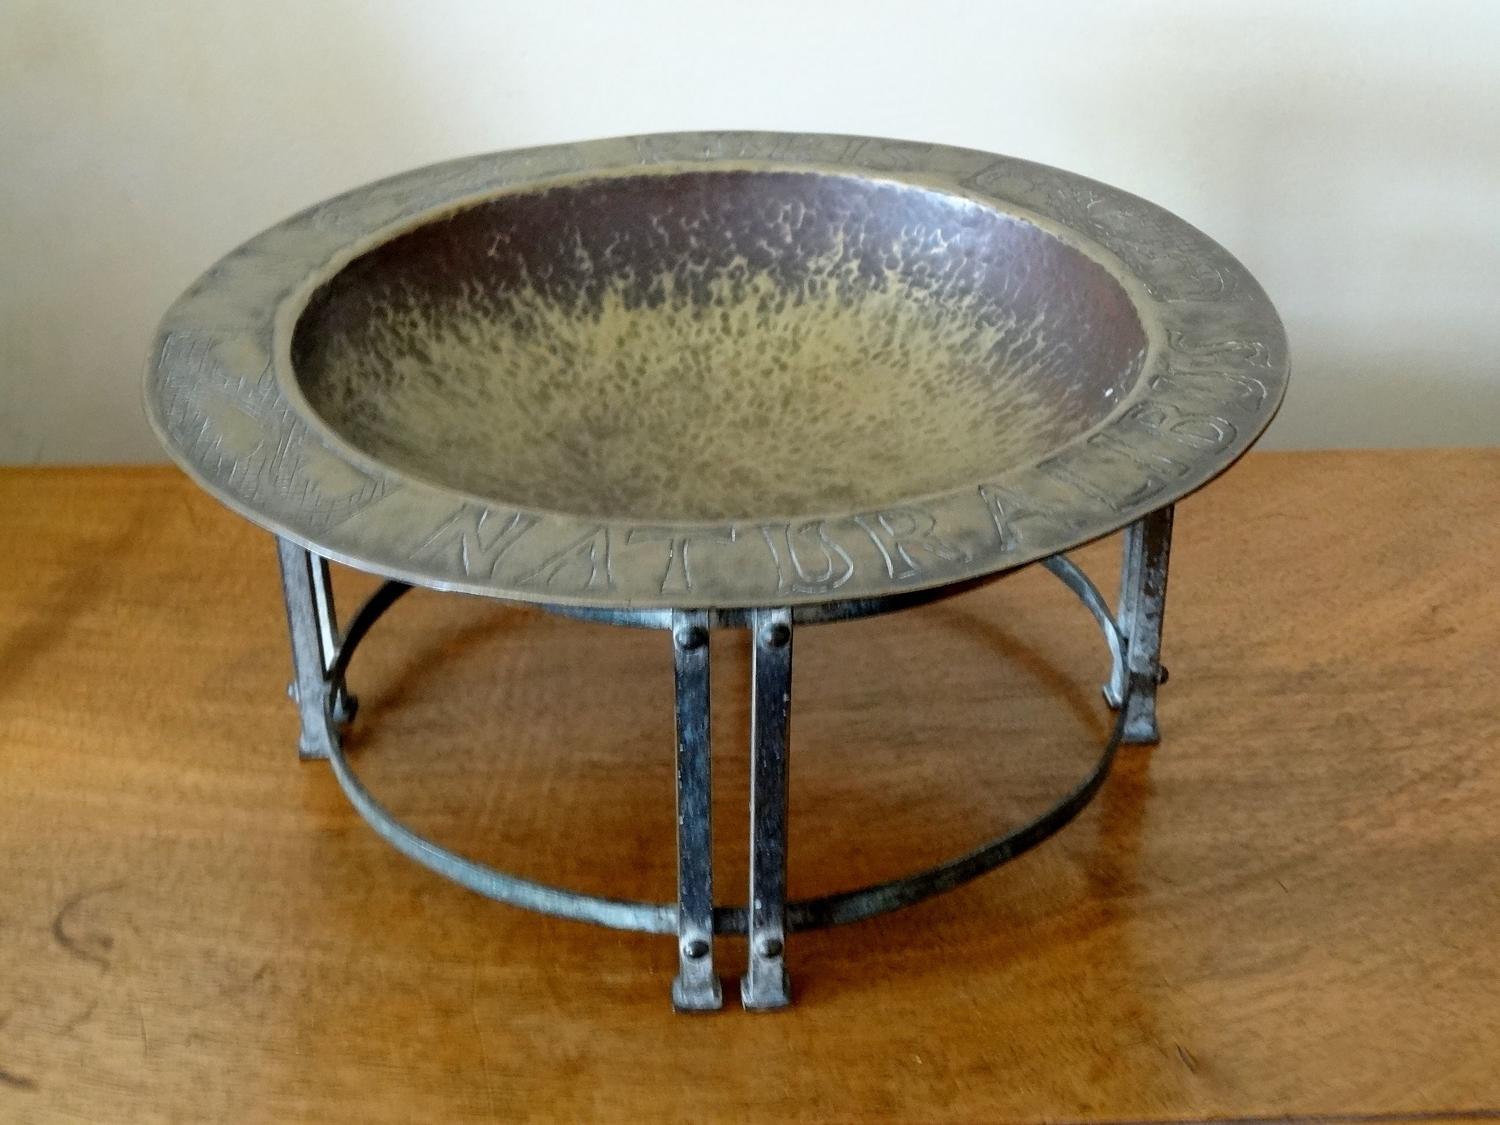 Duchess of Sutherland Glasgow Style bowl on stand